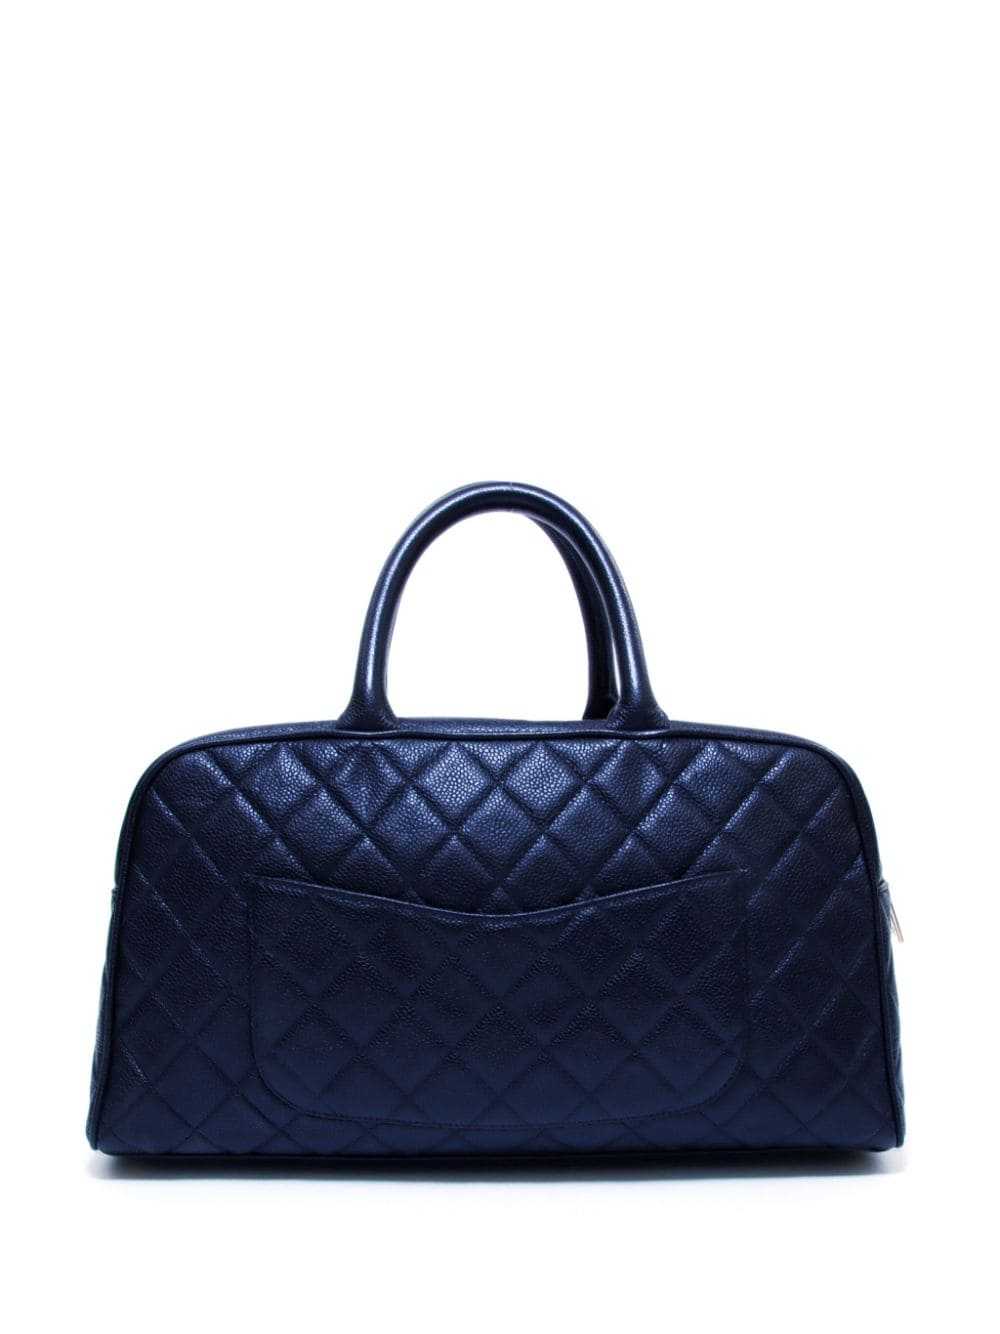 CHANEL Pre-Owned 2003-2004 diamond-quilted handba… - image 2